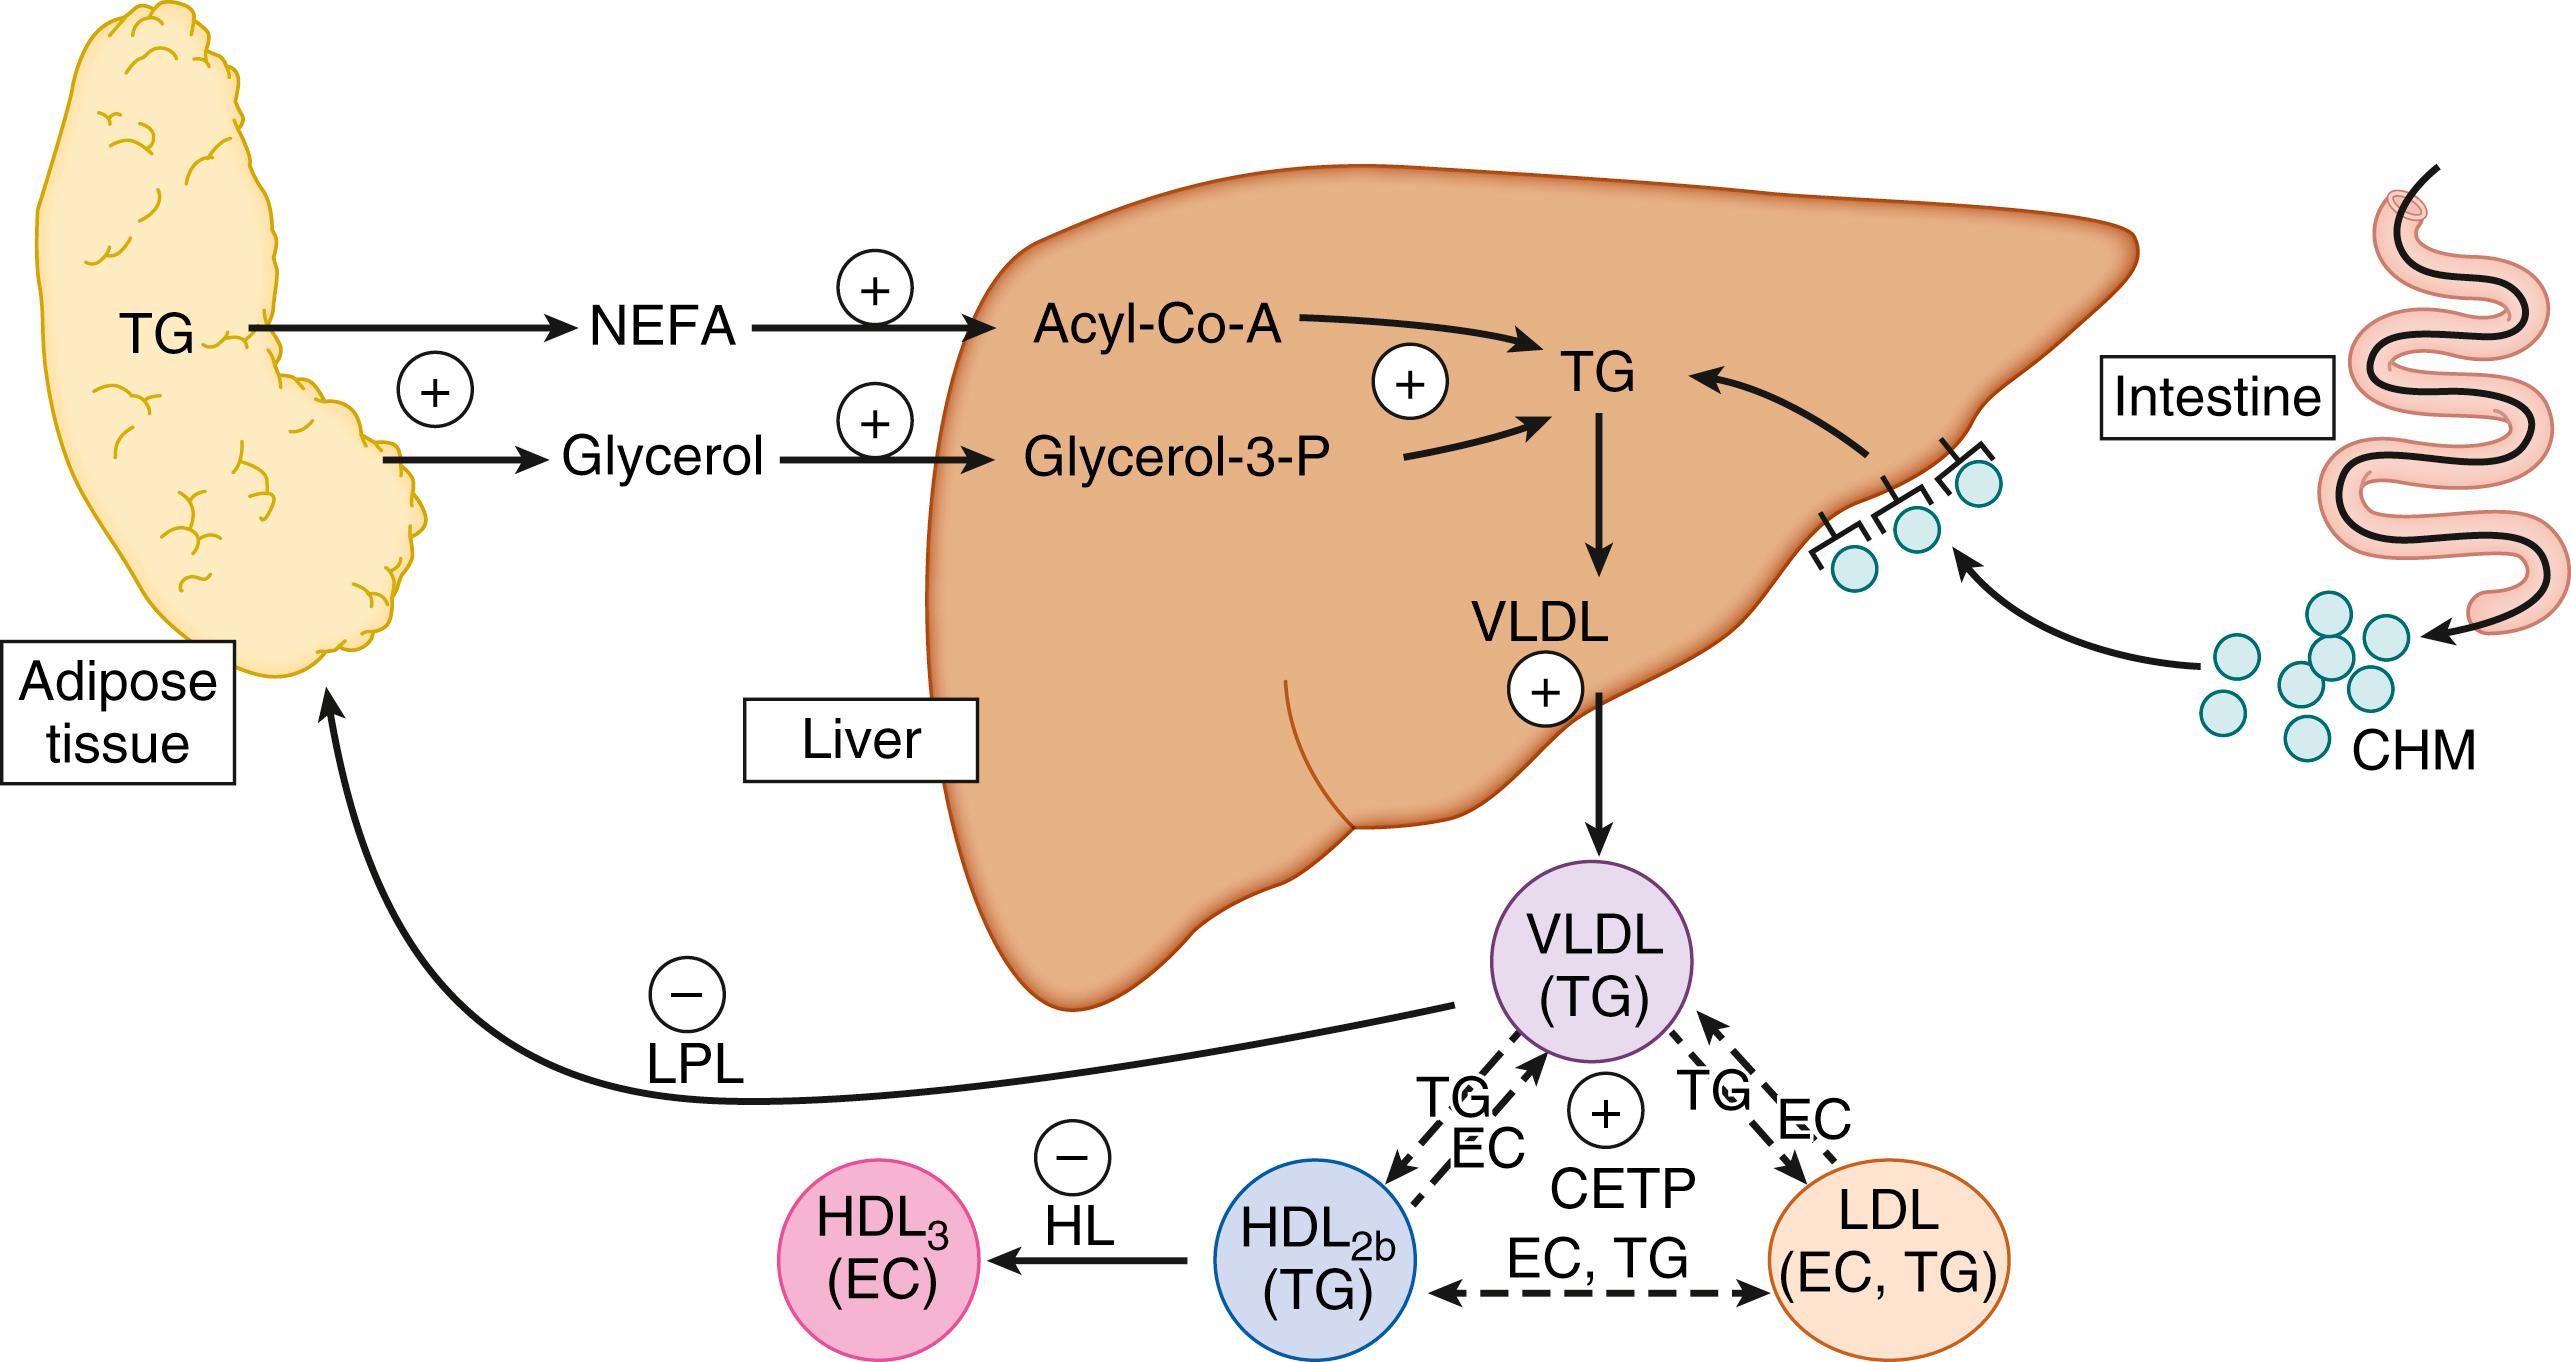 Fig. 31.2, Proposed control of major lipoprotein metabolic pathways during late pregnancy. CETP, Cholesteryl ester transfer protein; CHM , chylomicrons; EC, esterified cholesterol; HDL , high-density lipoproteins; HL, hepatic lipase; LDL , low-density lipoproteins; LPL, lipoprotein lipase; NEFA, nonesterified fatty acids; TG, triglycerides; VLDL , very low-density lipoproteins.